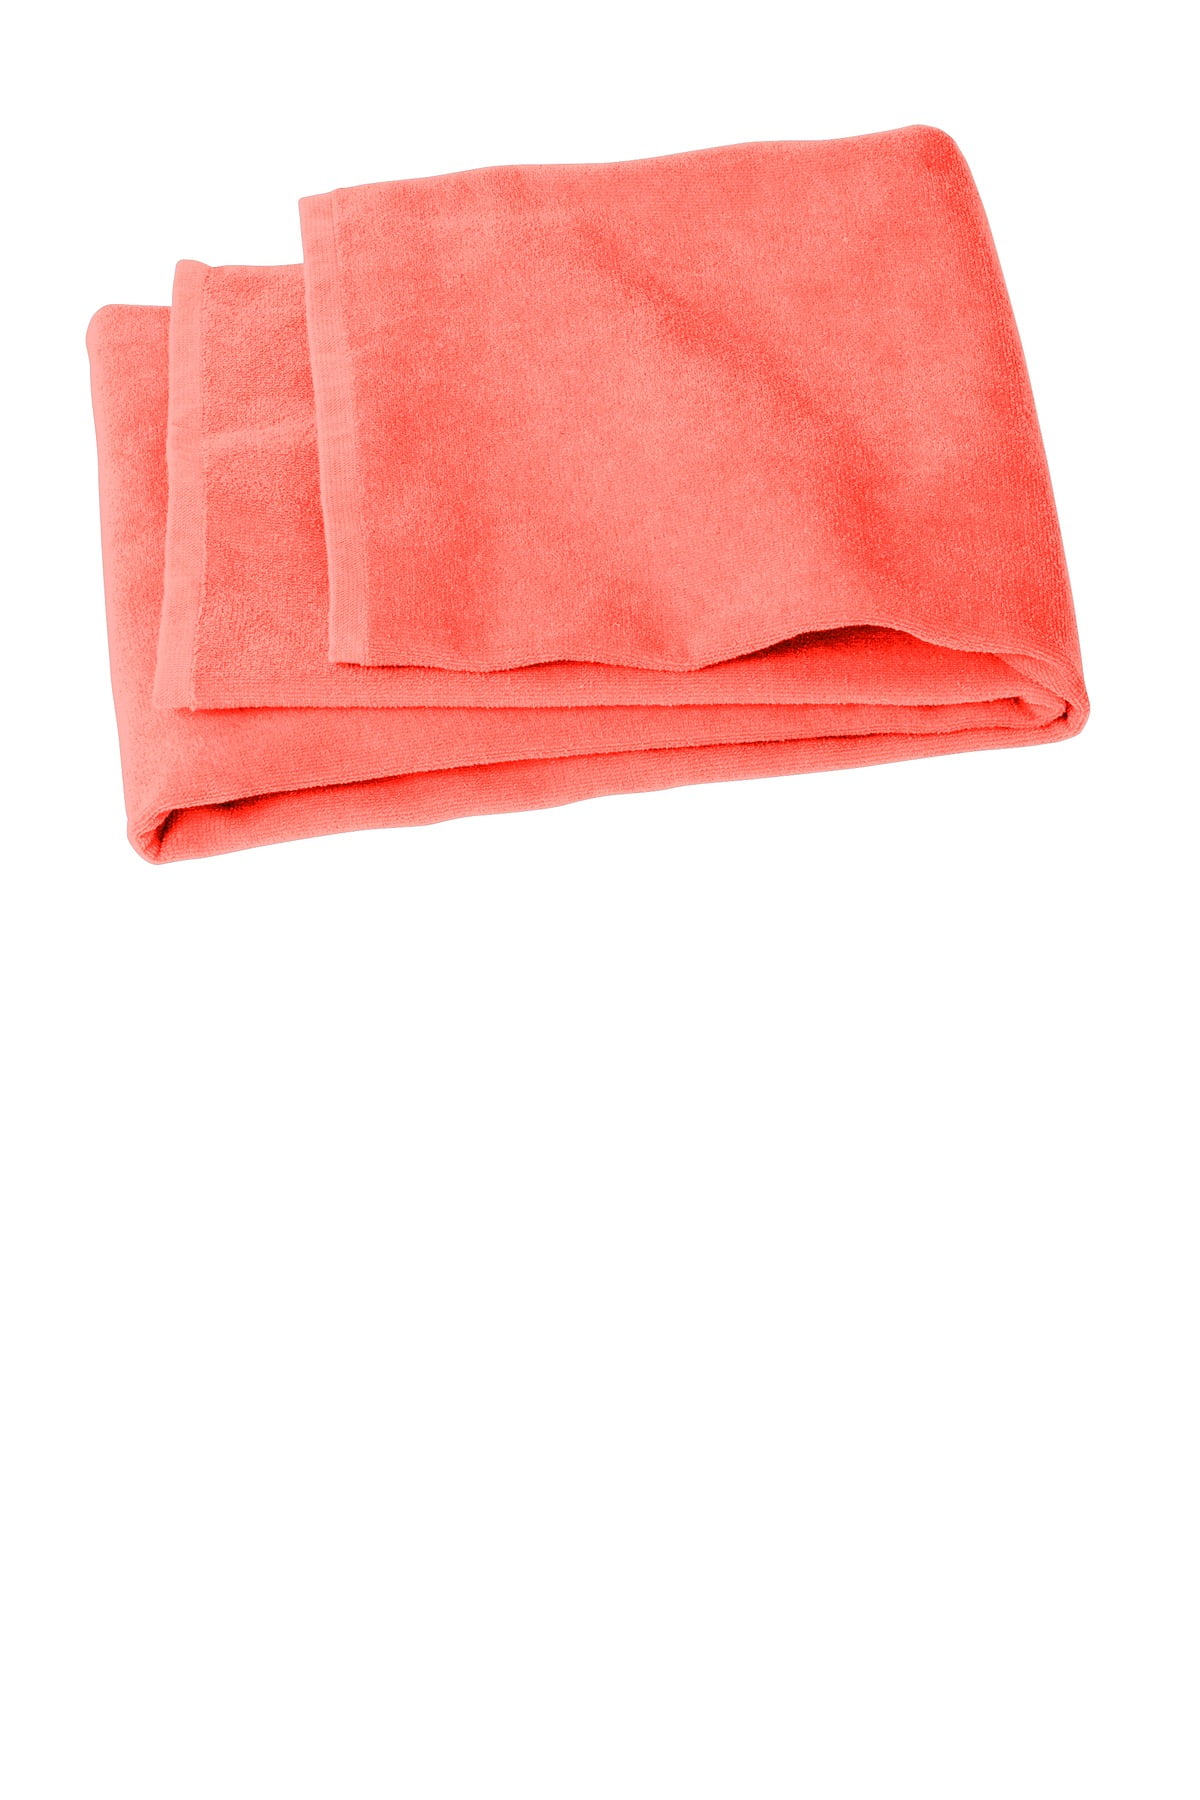 Storm Woven Towel Pink 